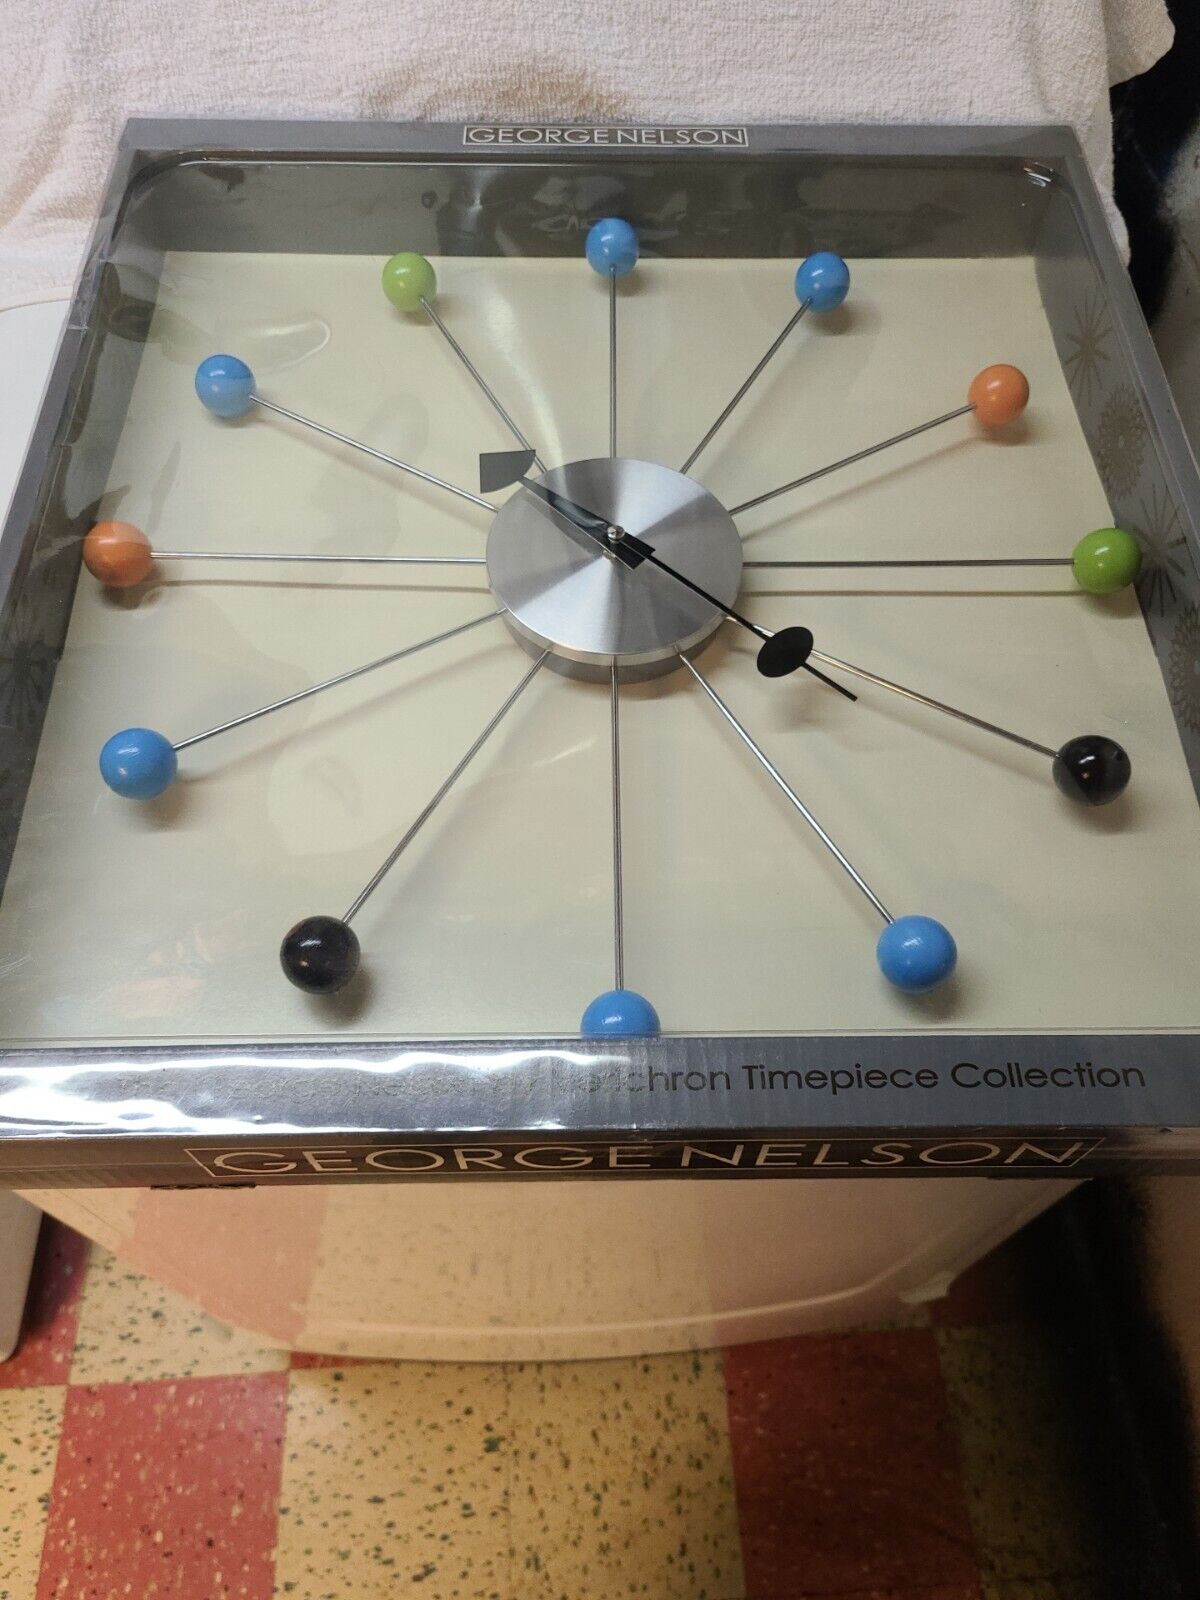 George Nelson Clock, Multi-Color Balls, 1950s Style. New In Box. Sealed.